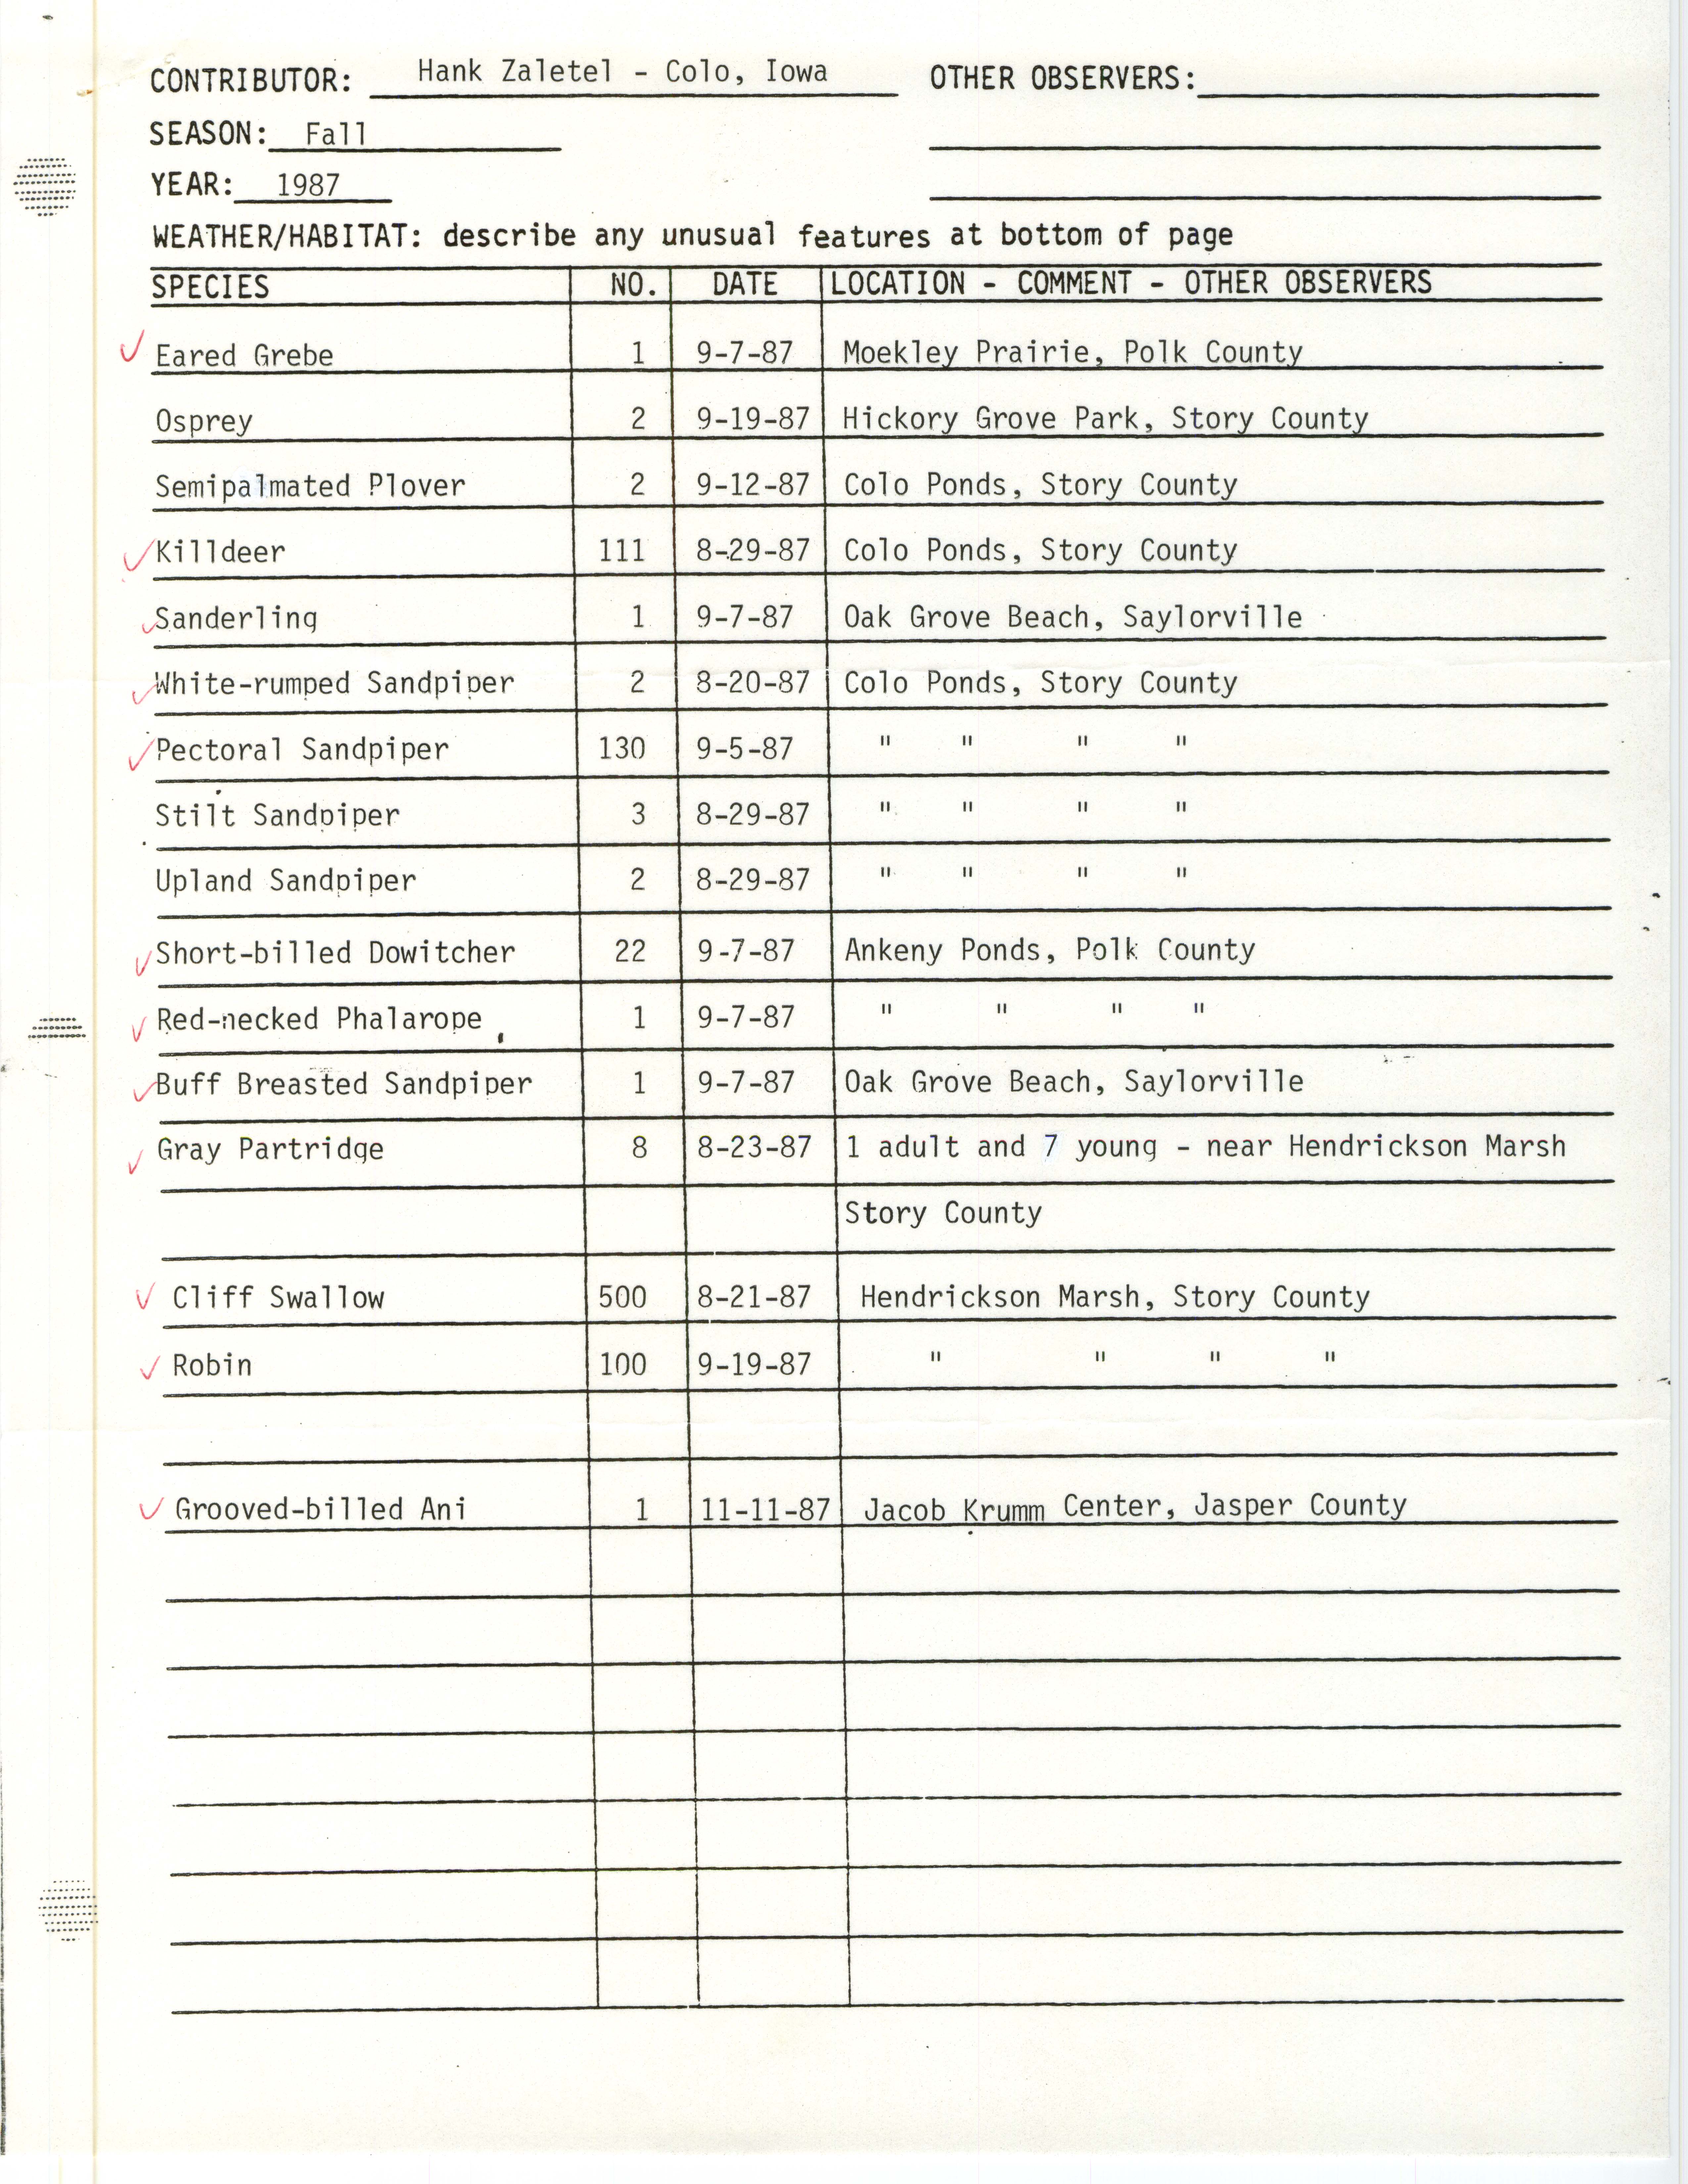 Field notes contributed by Hank Zaletel, fall 1987